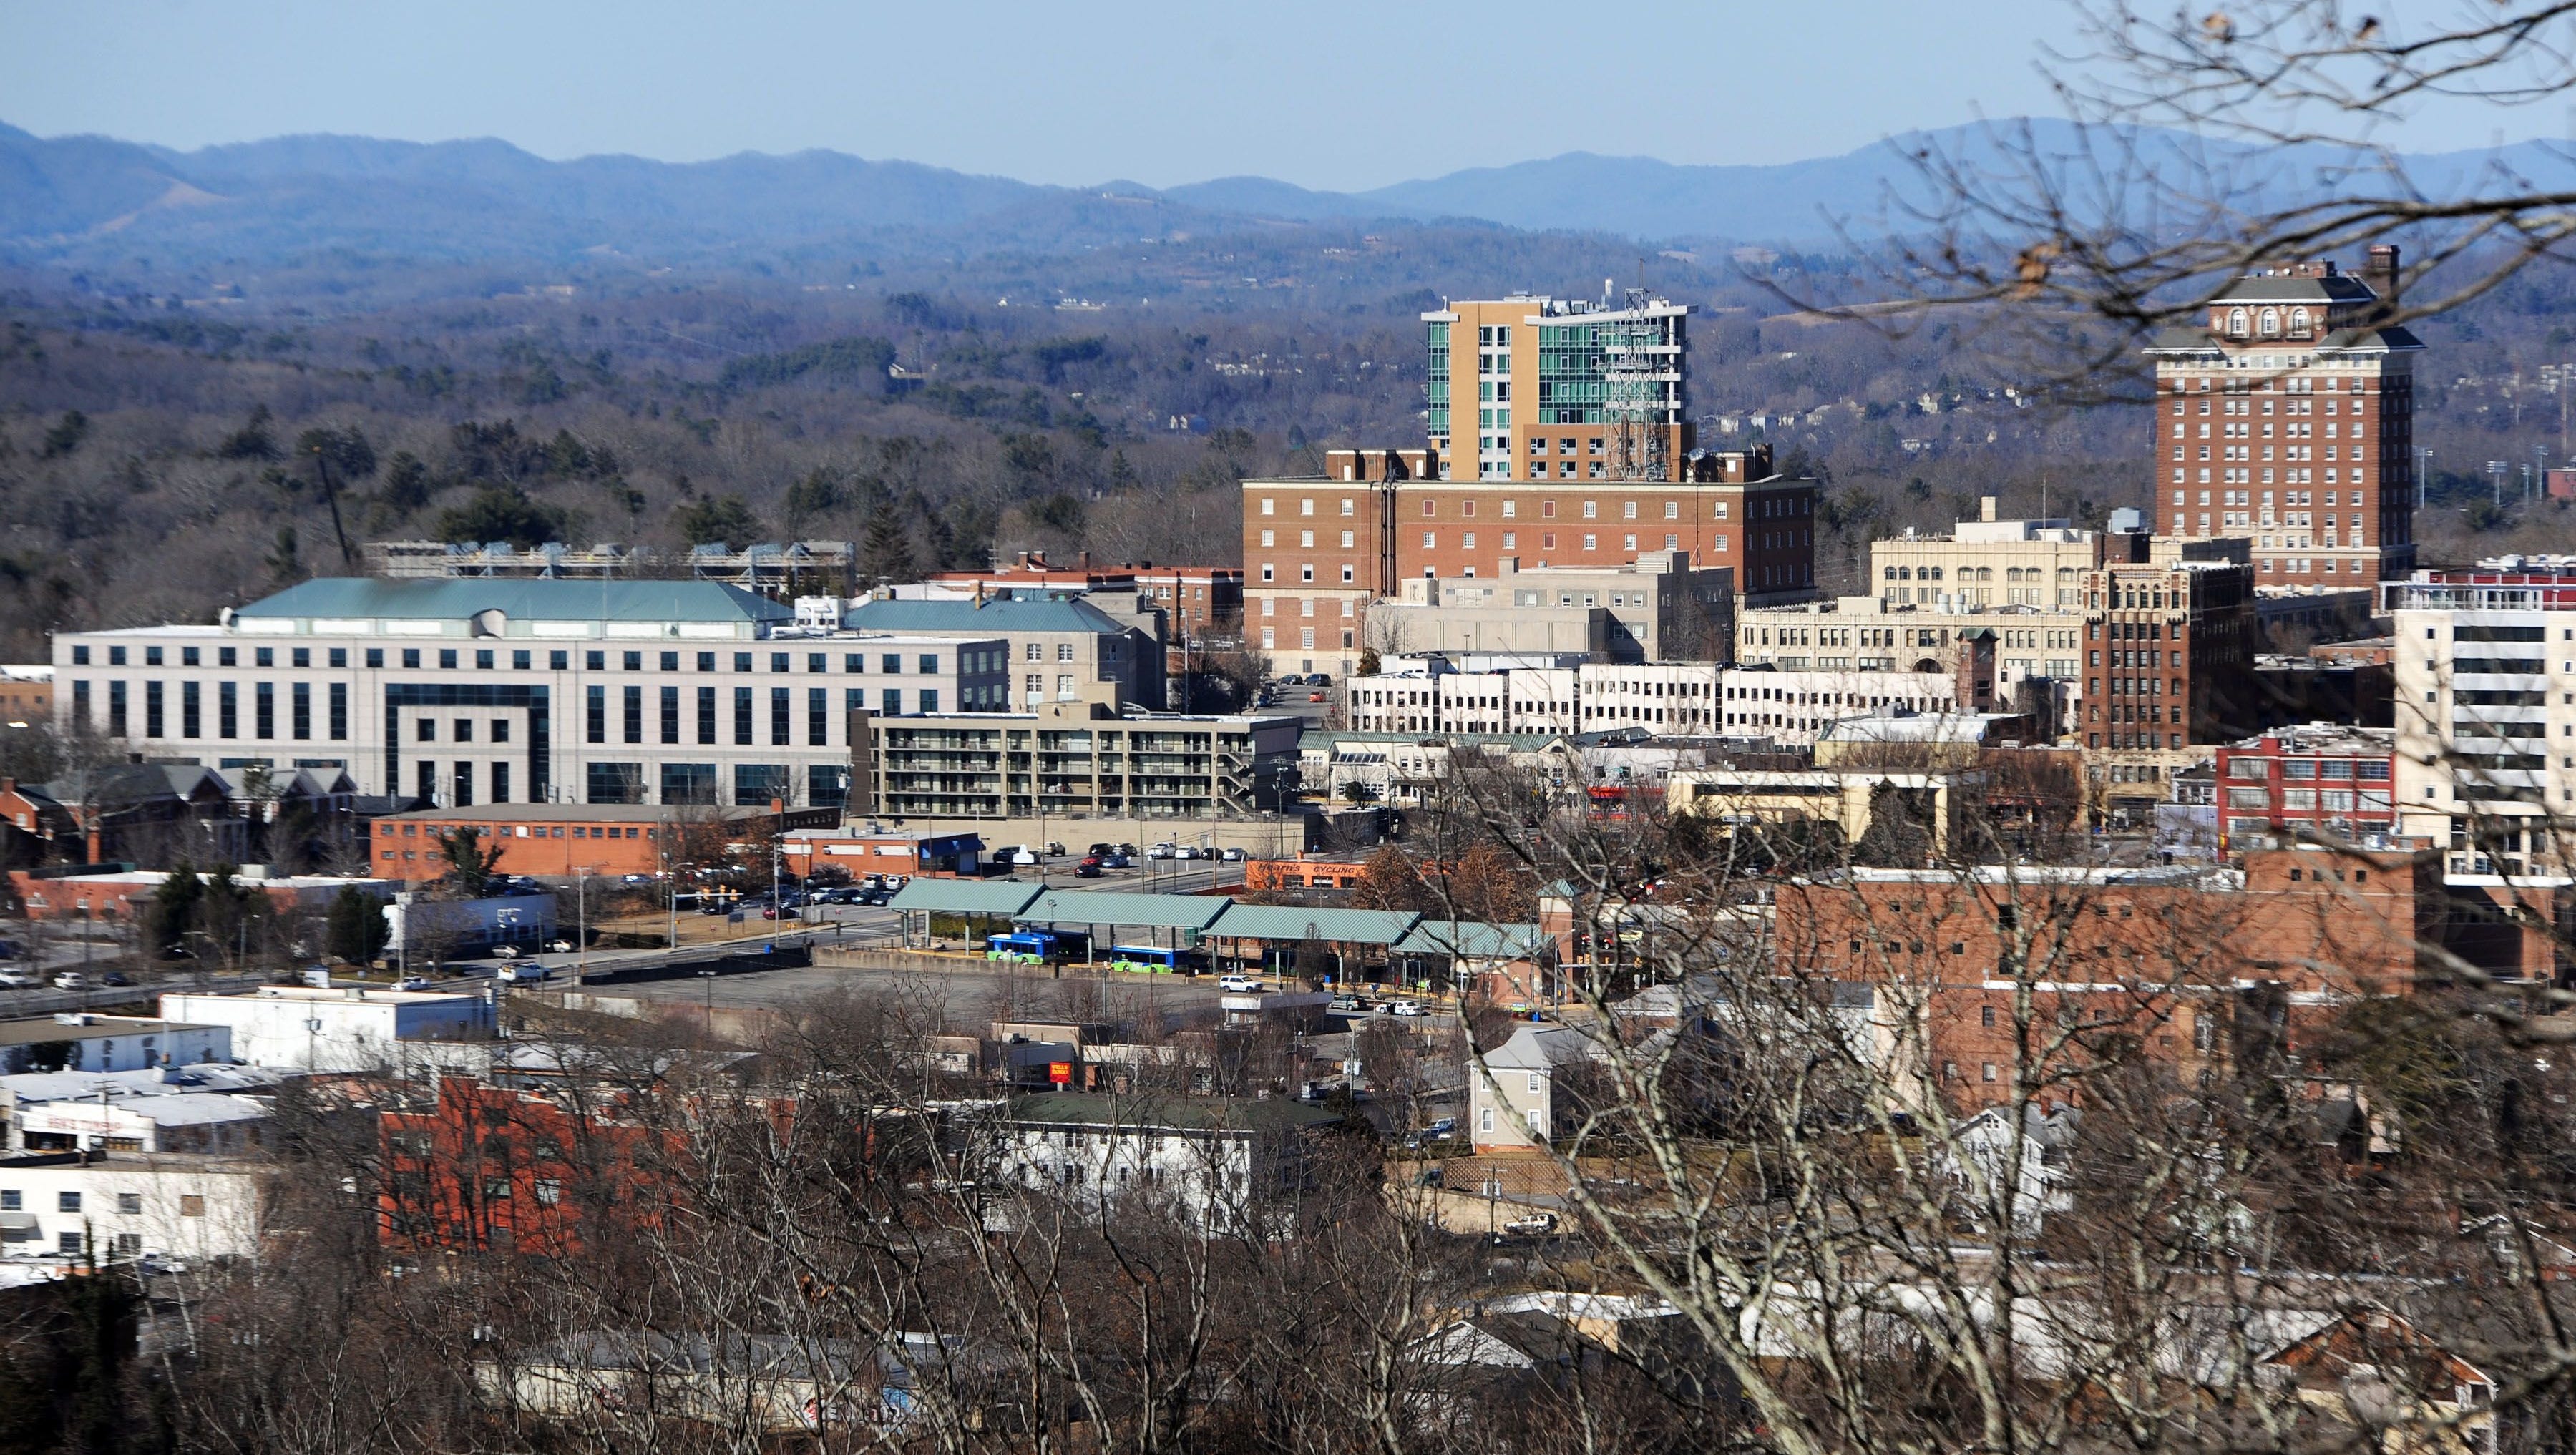 Asheville makes 'worst place to live,' based on standard of living